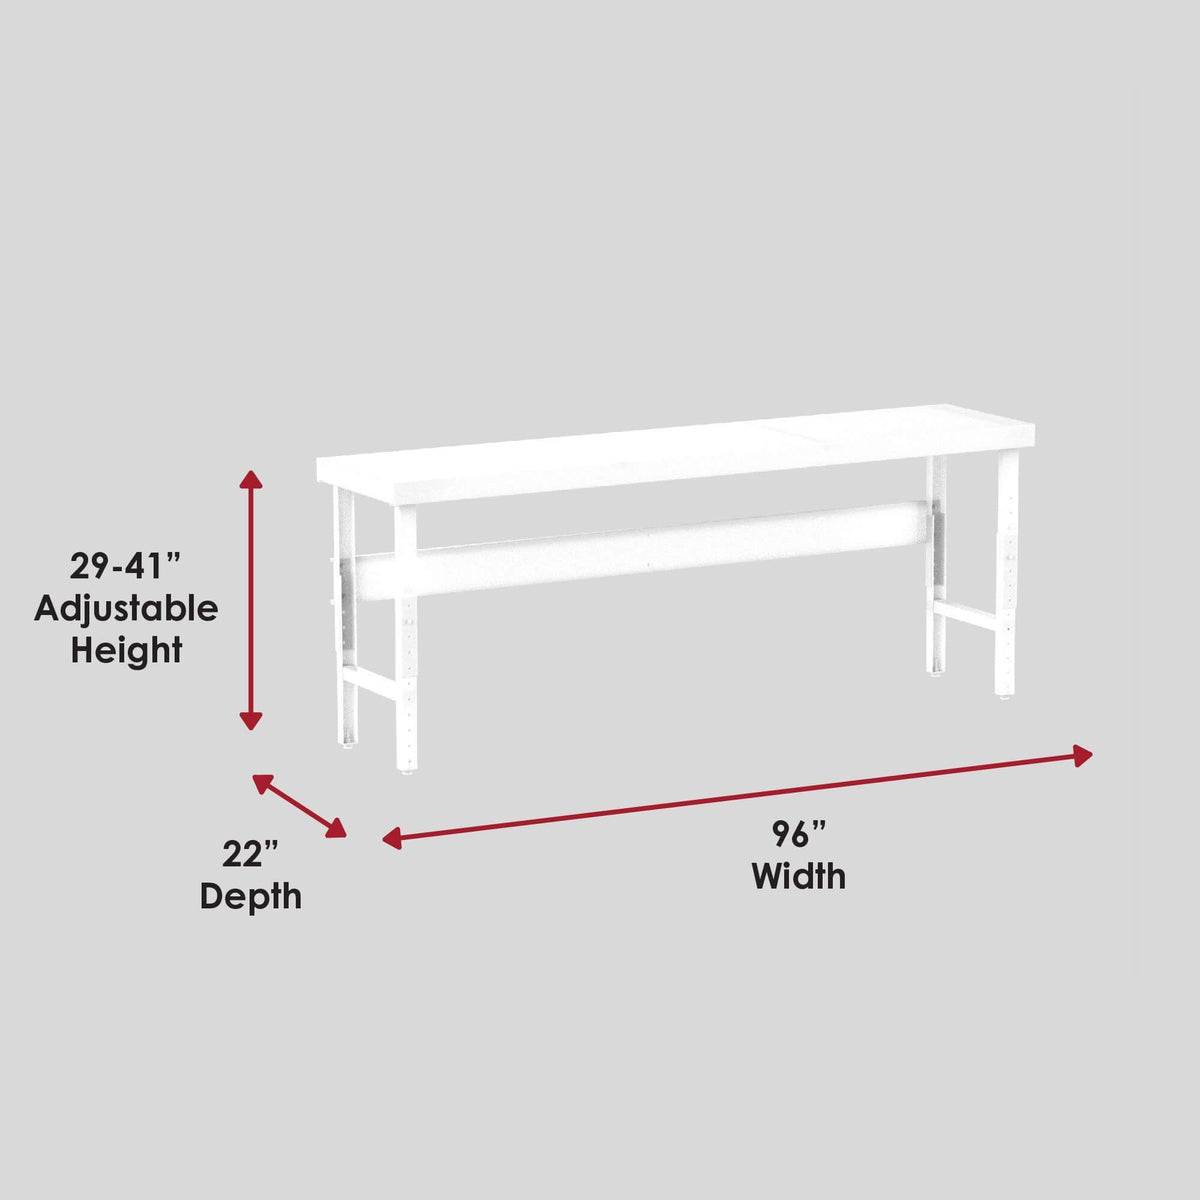 Valley Craft Adjustable Height Work Tables